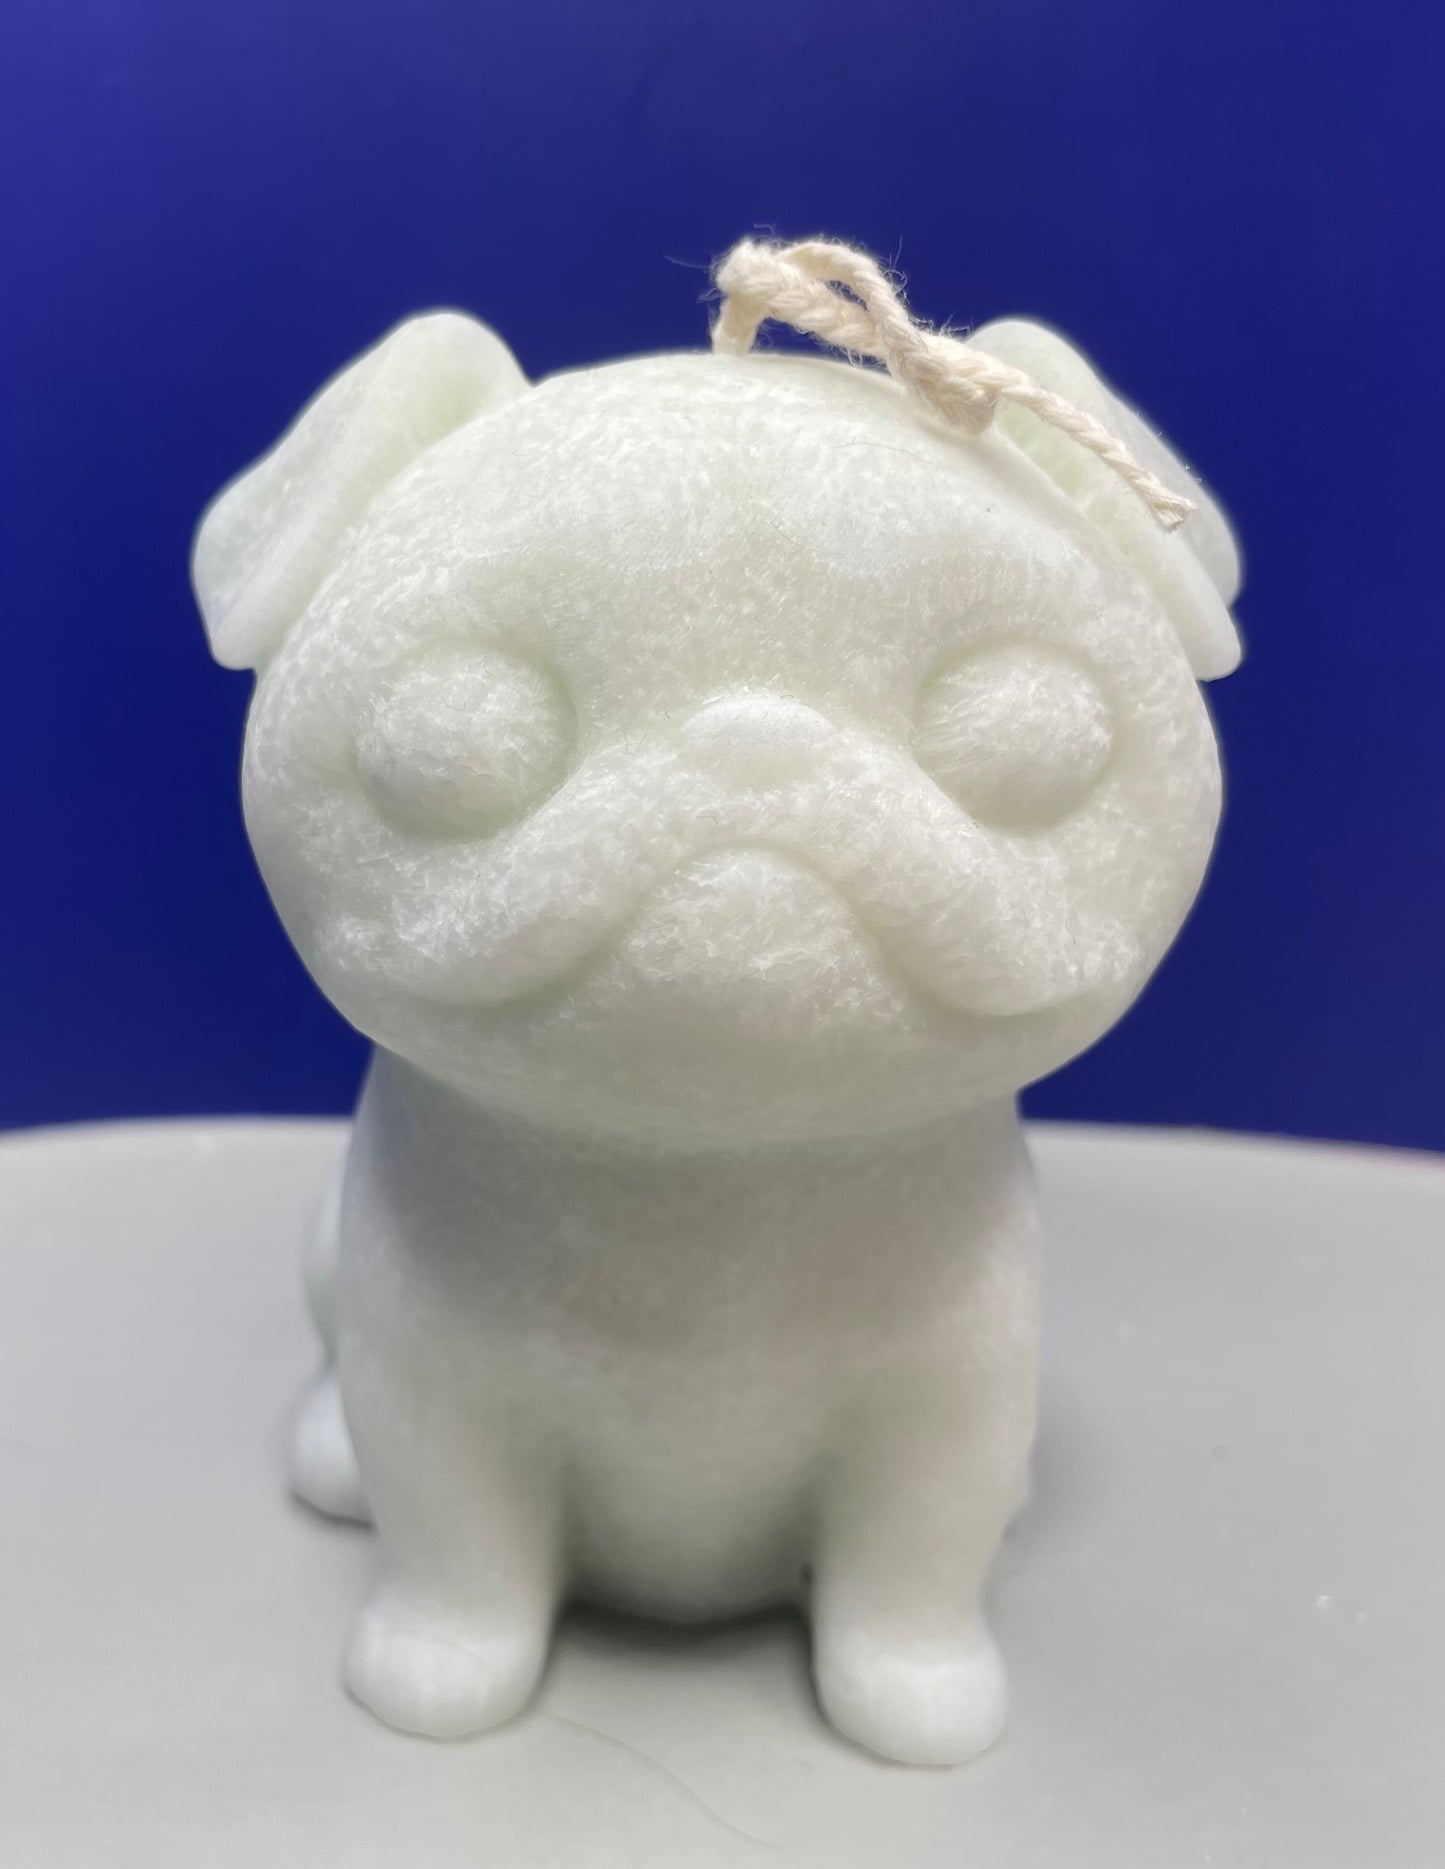 Mister Pugglesworth front view candle